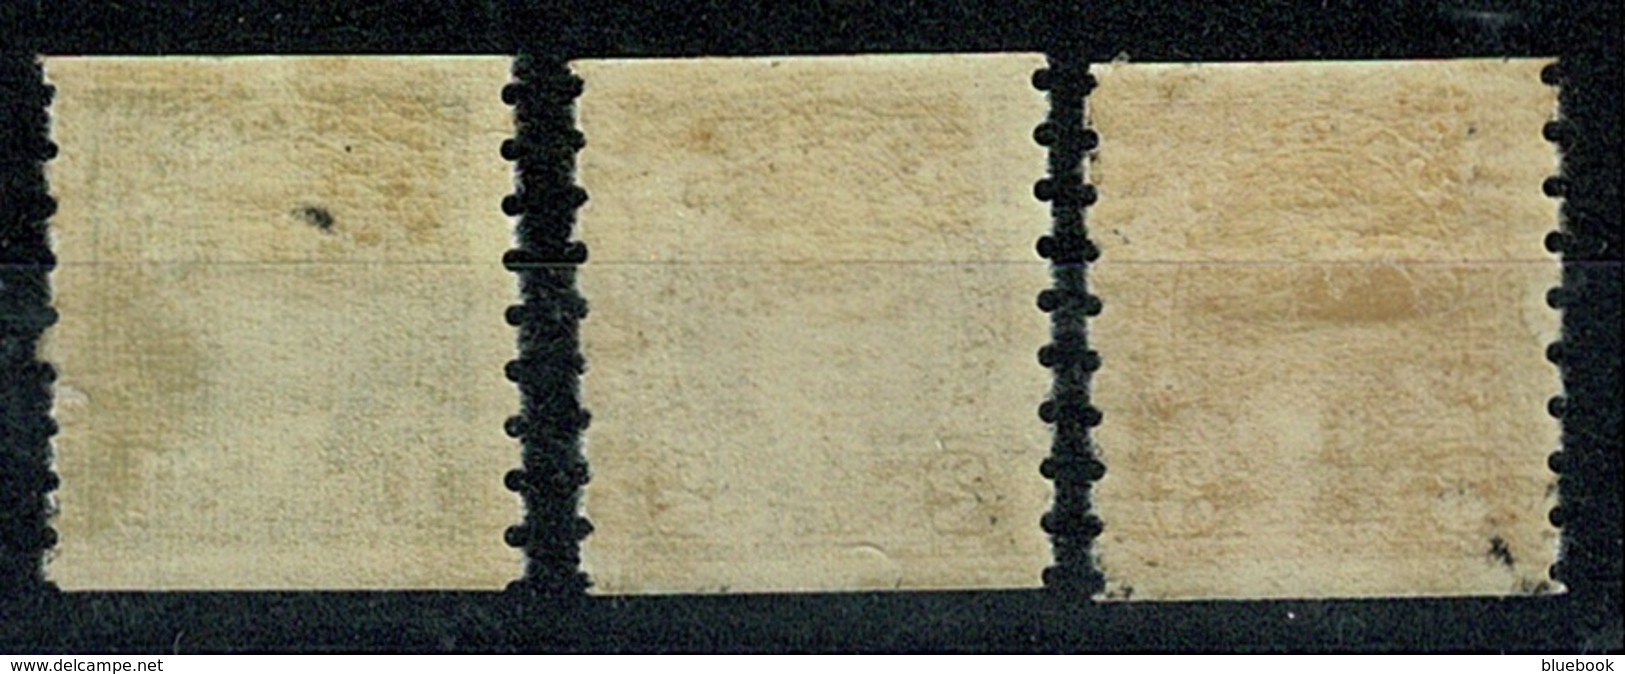 Ref 1290 - Canada 1937 - 3 Coil Stamps Imperf X Perf 8 - SG 368-370 - Mint Stamps Cat £32 - Ungebraucht